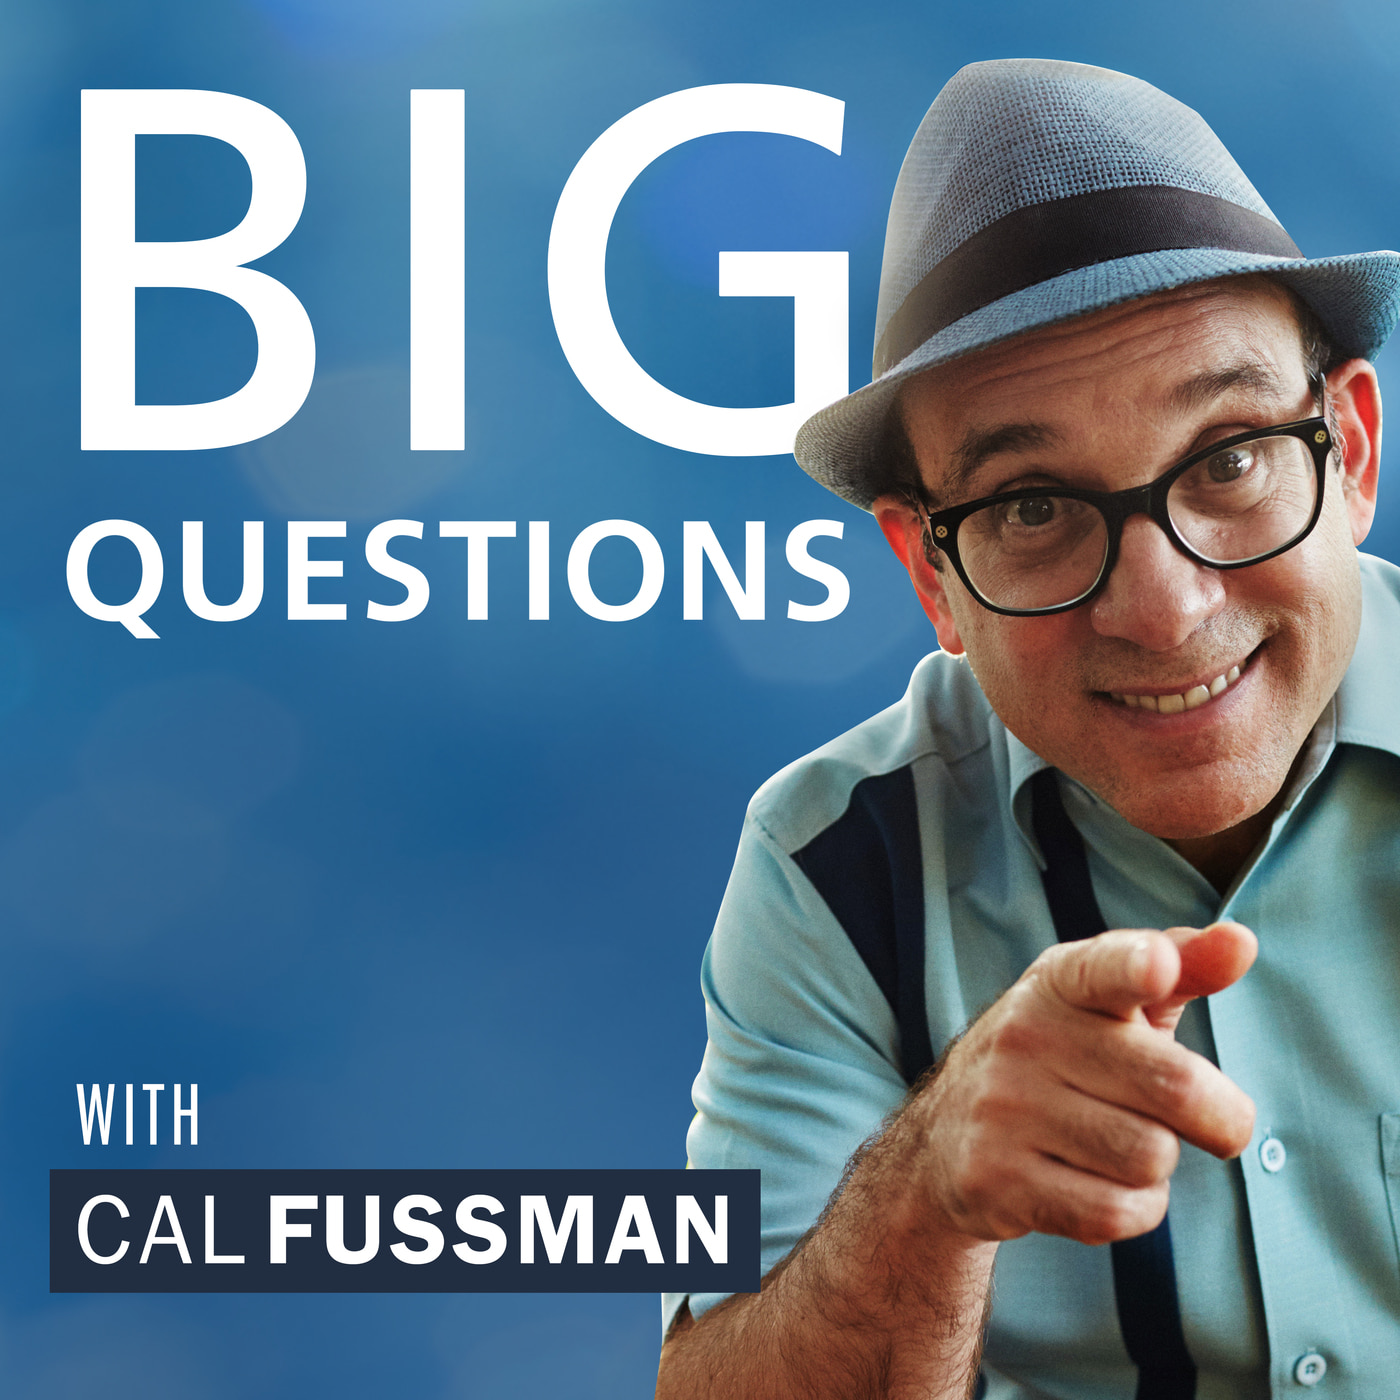 Blake Mycoskie on Big Questions with Cal Fussman Intro